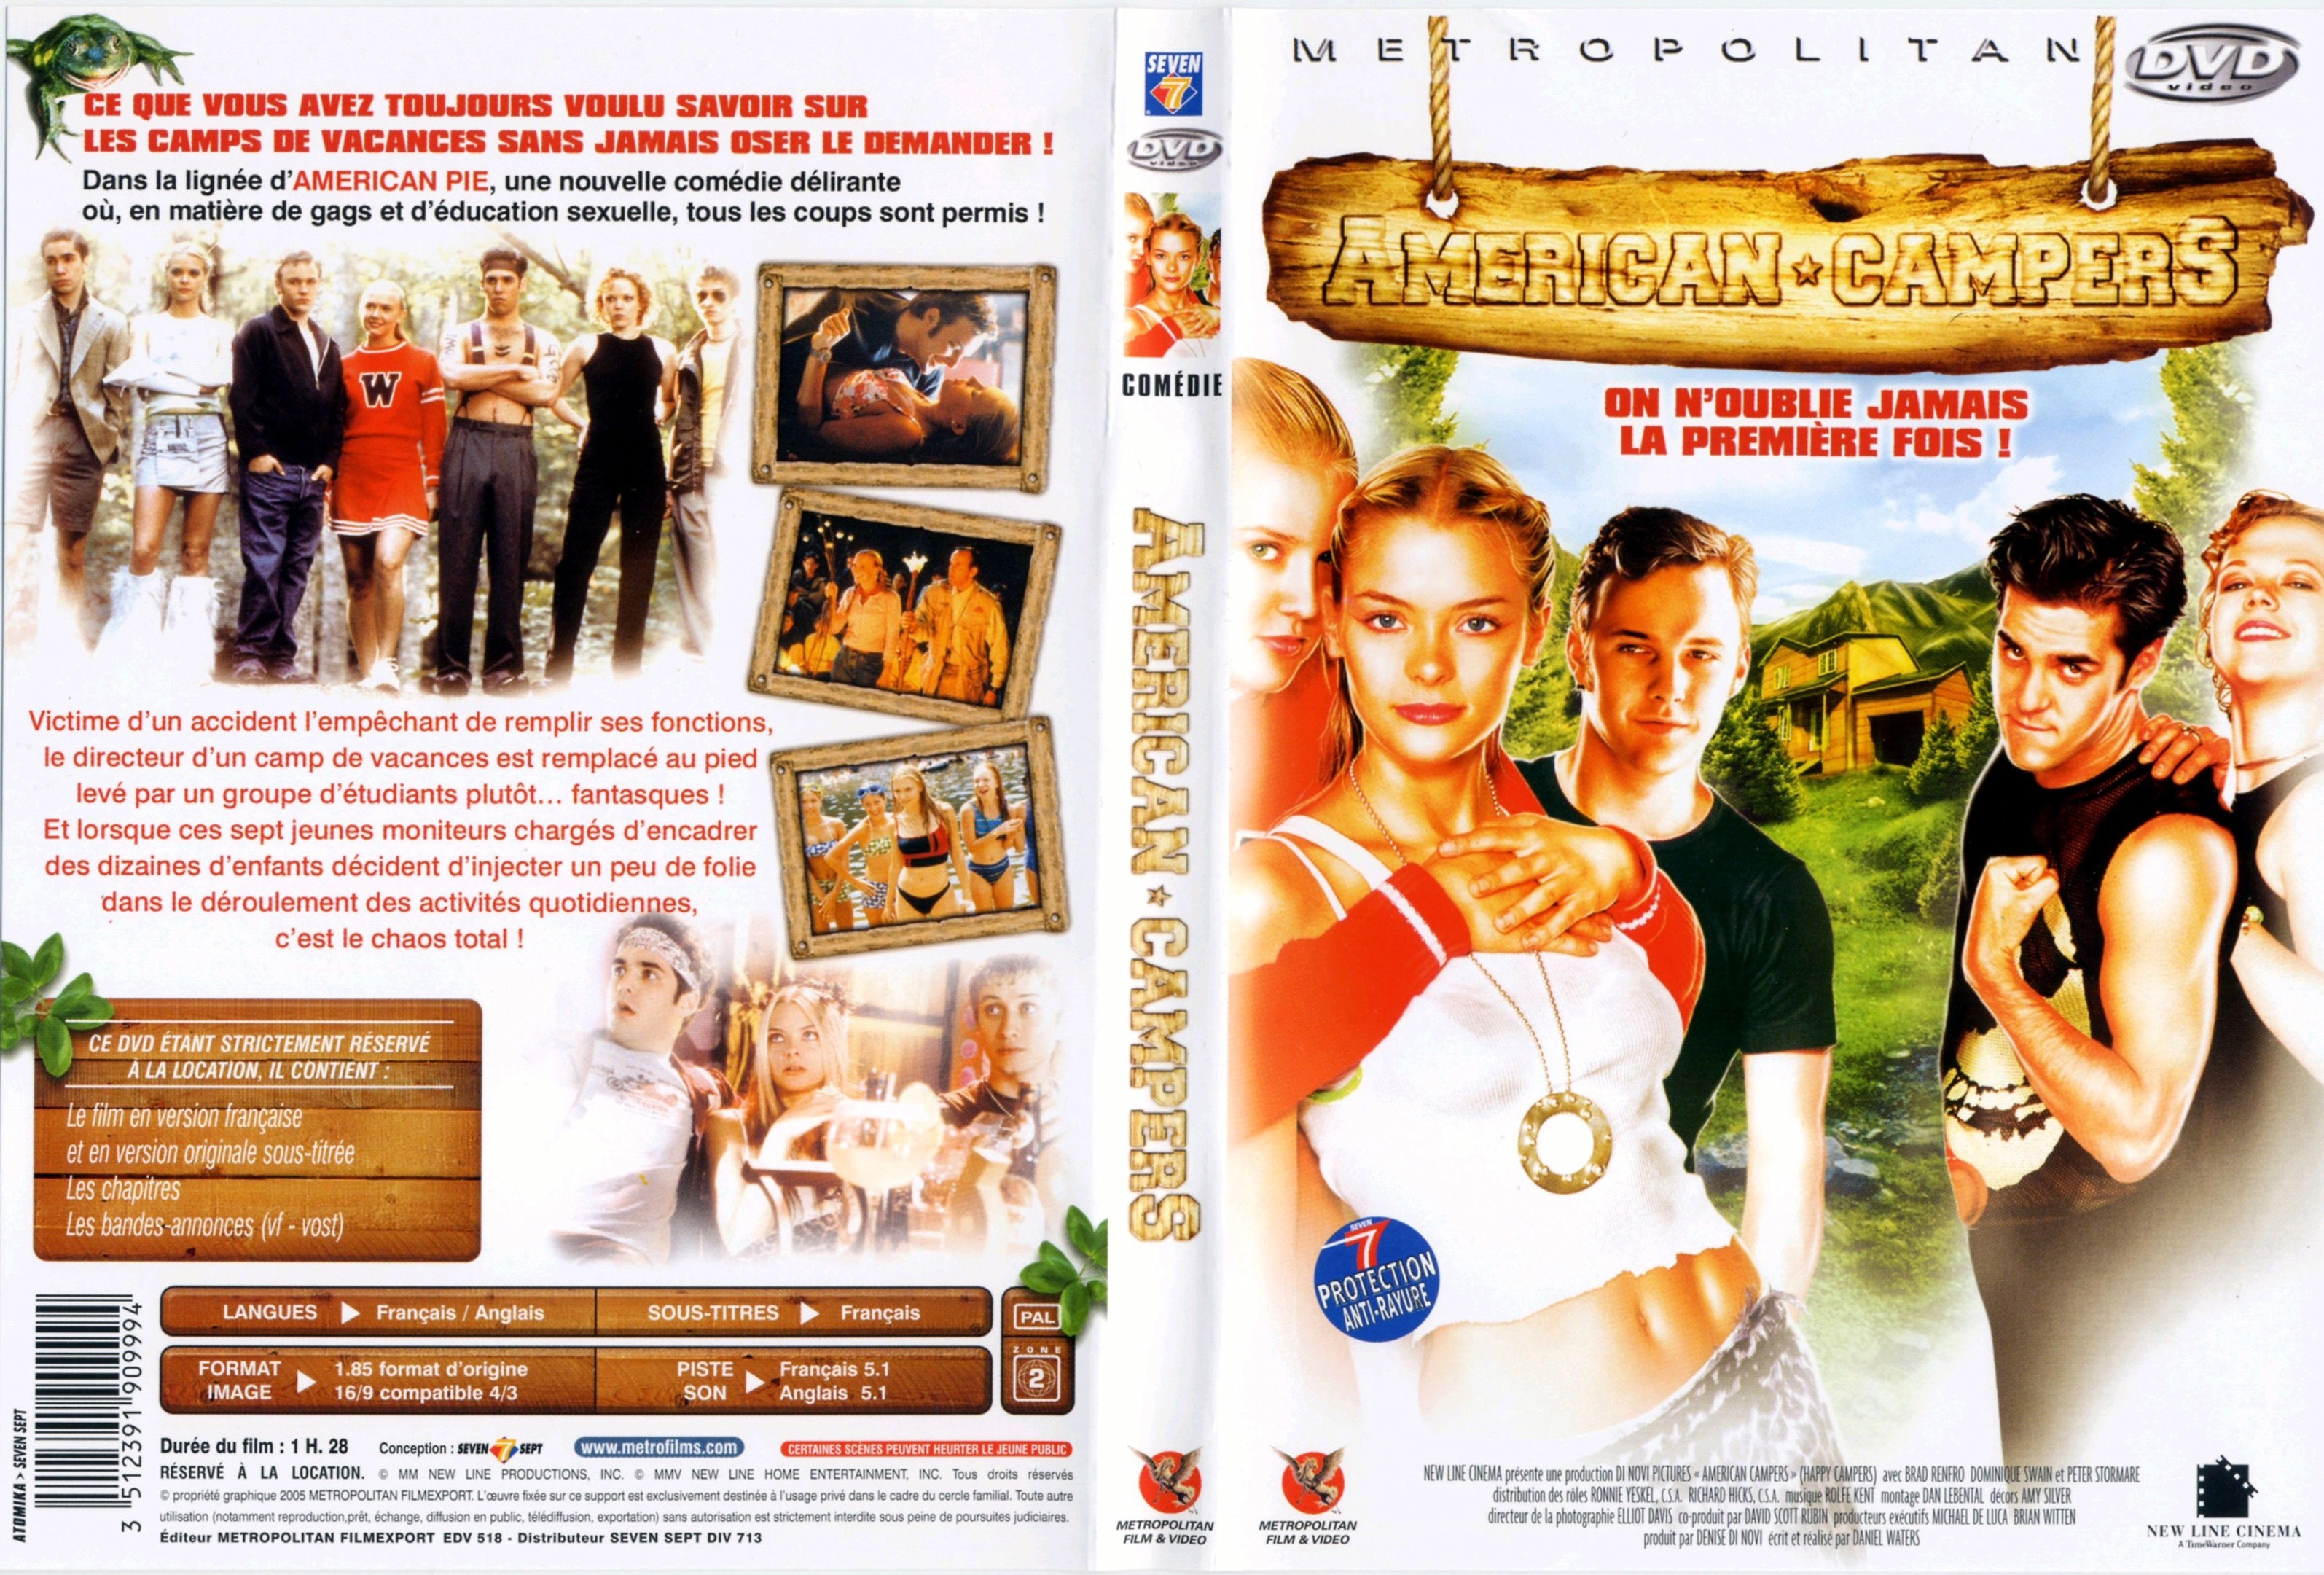 Jaquette DVD American campers